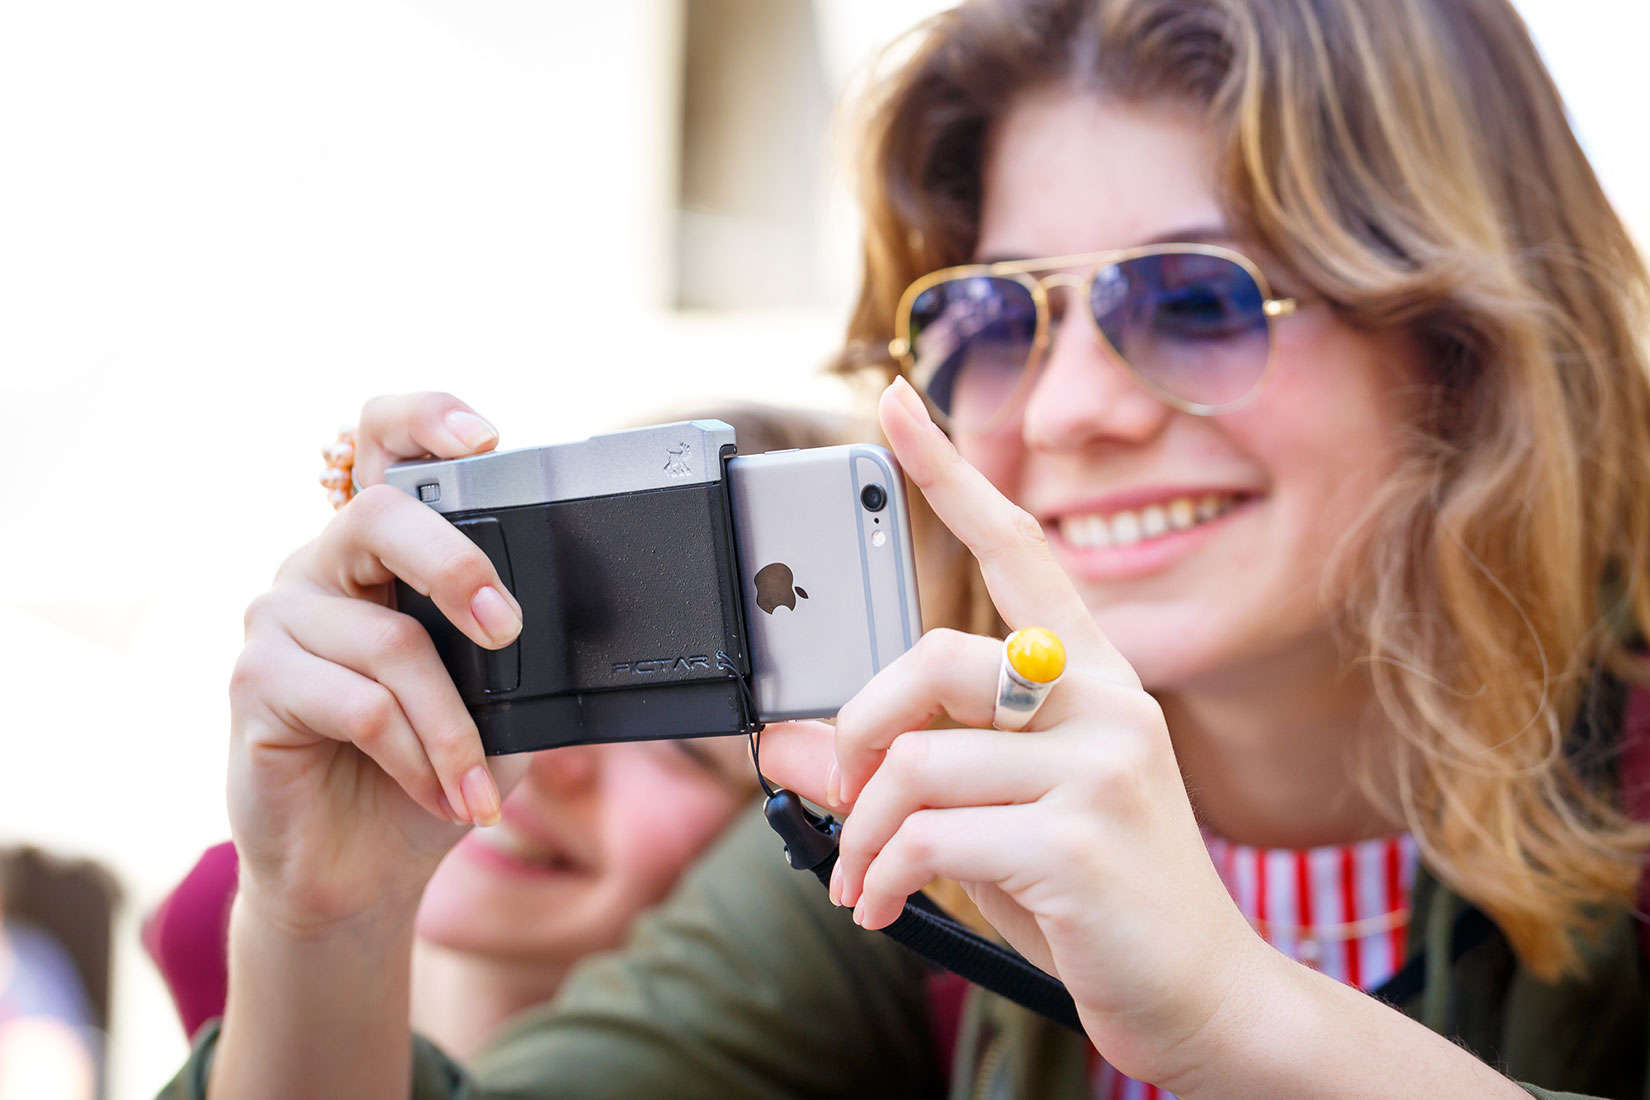 Pictar eliminates the worry of dropping your iPhone while making pictures.